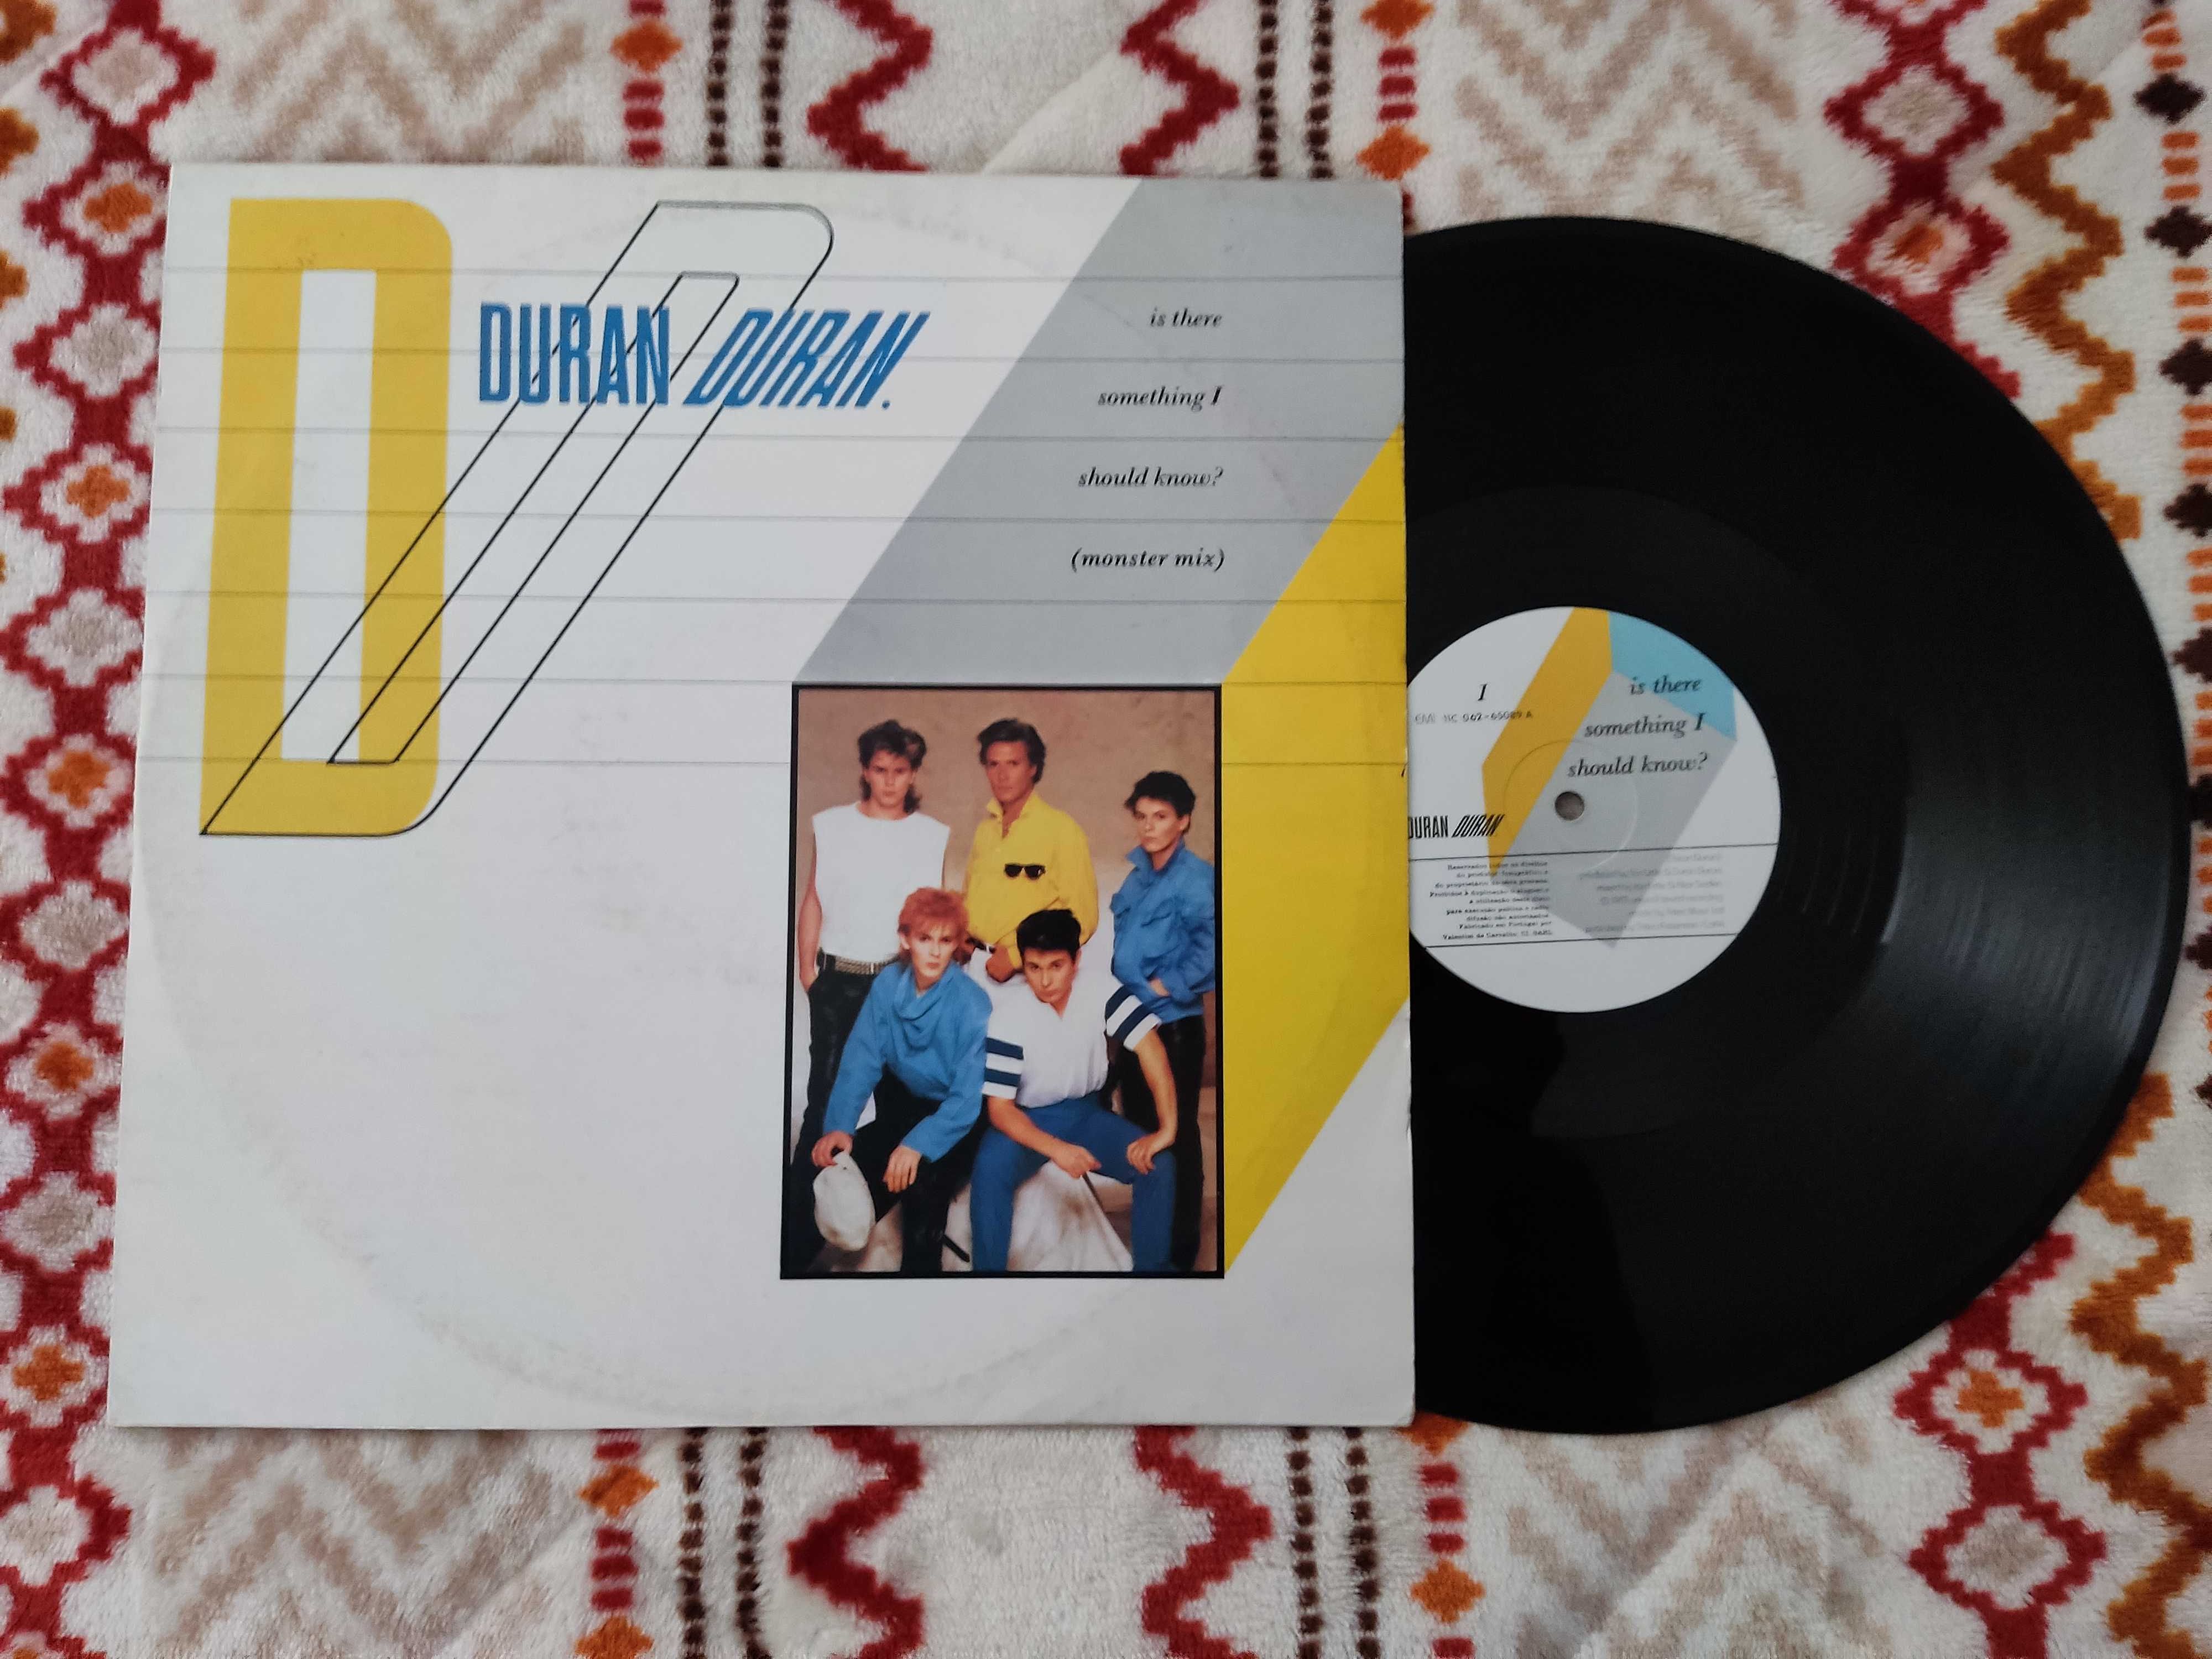 Duran Duran - Is There Something I Should Know? Vinil - Maxi single